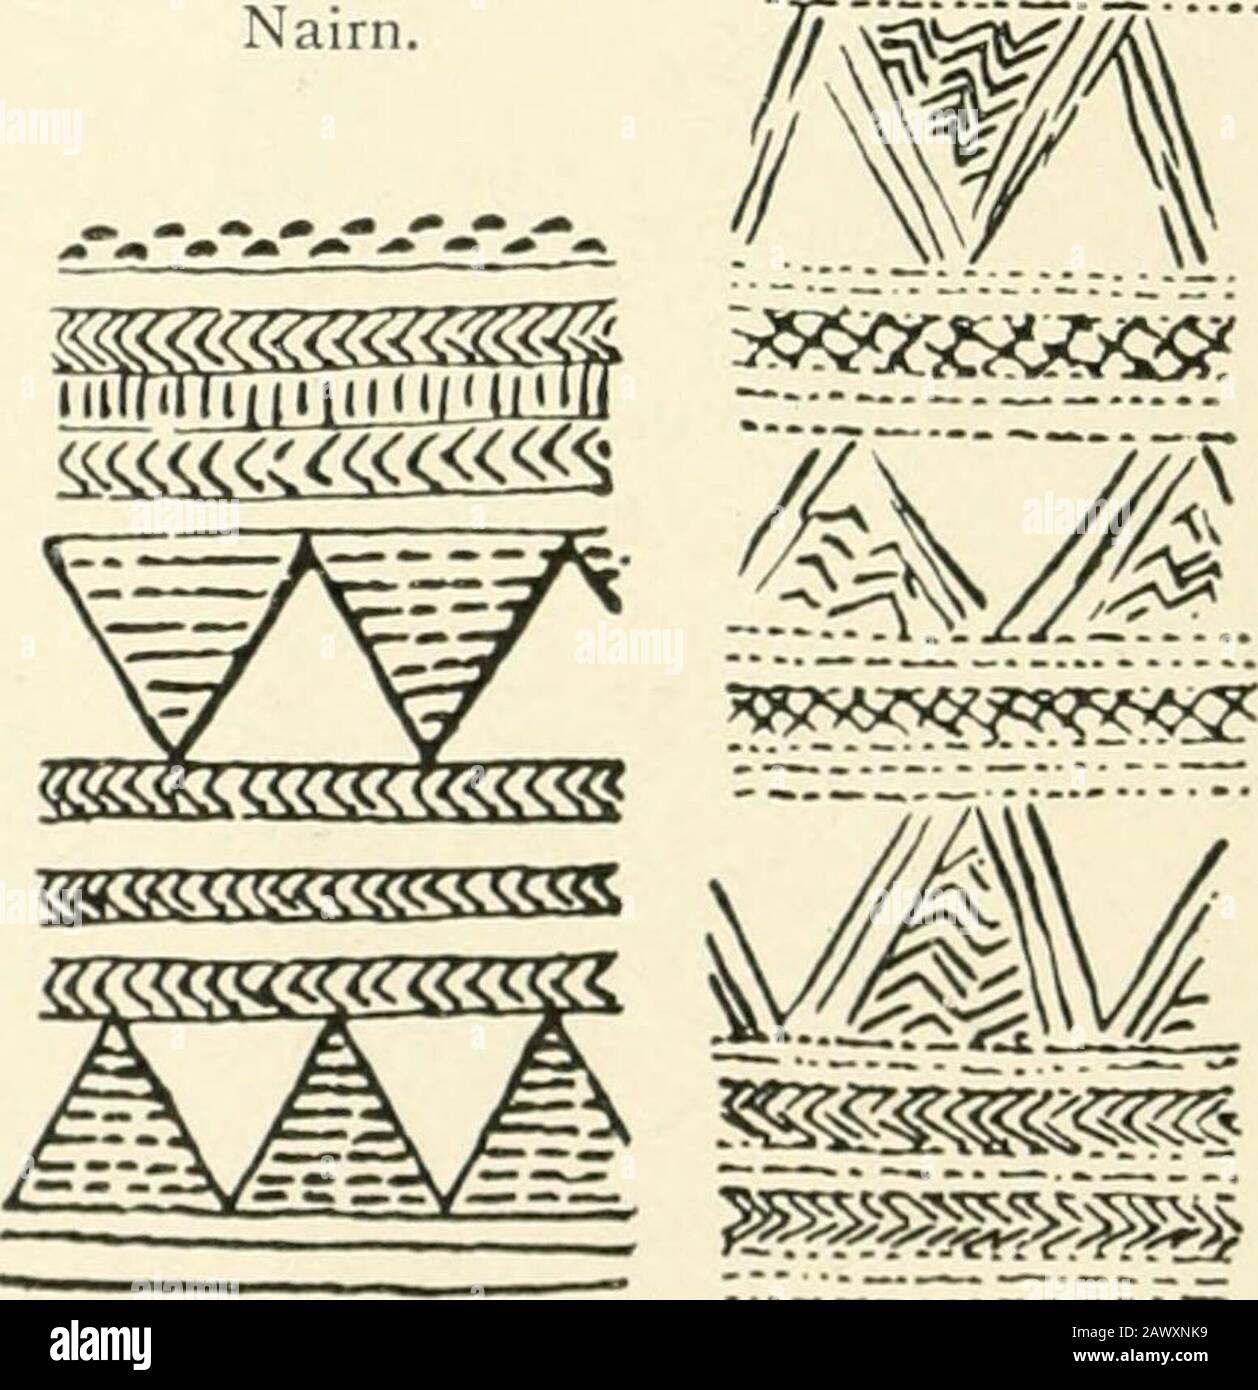 An introduction to the study of prehistoric art . fe&X^ iTxuirriitrjXQi Nairn.. Northumberland. Aberdeen. Roxburgh. Fig. 217.—Designs on beakers from thcseven; provinces of Hrit.Tin. (After Abercromby.) CHARACTER OF BRONZE AGE DECORATION 185 Drinking Cup dates from a very early period of the BronzeAge. This is shown by the nature of the objects accom-panying it. Of sixty-seven interments containing beakers,whilst fifty-two were associated with stone implements,only twenty-one contained objects of bronze, and thesewere of a primitive character as awls and knife daggers. The DistribtUioii of Bea Stock Photo